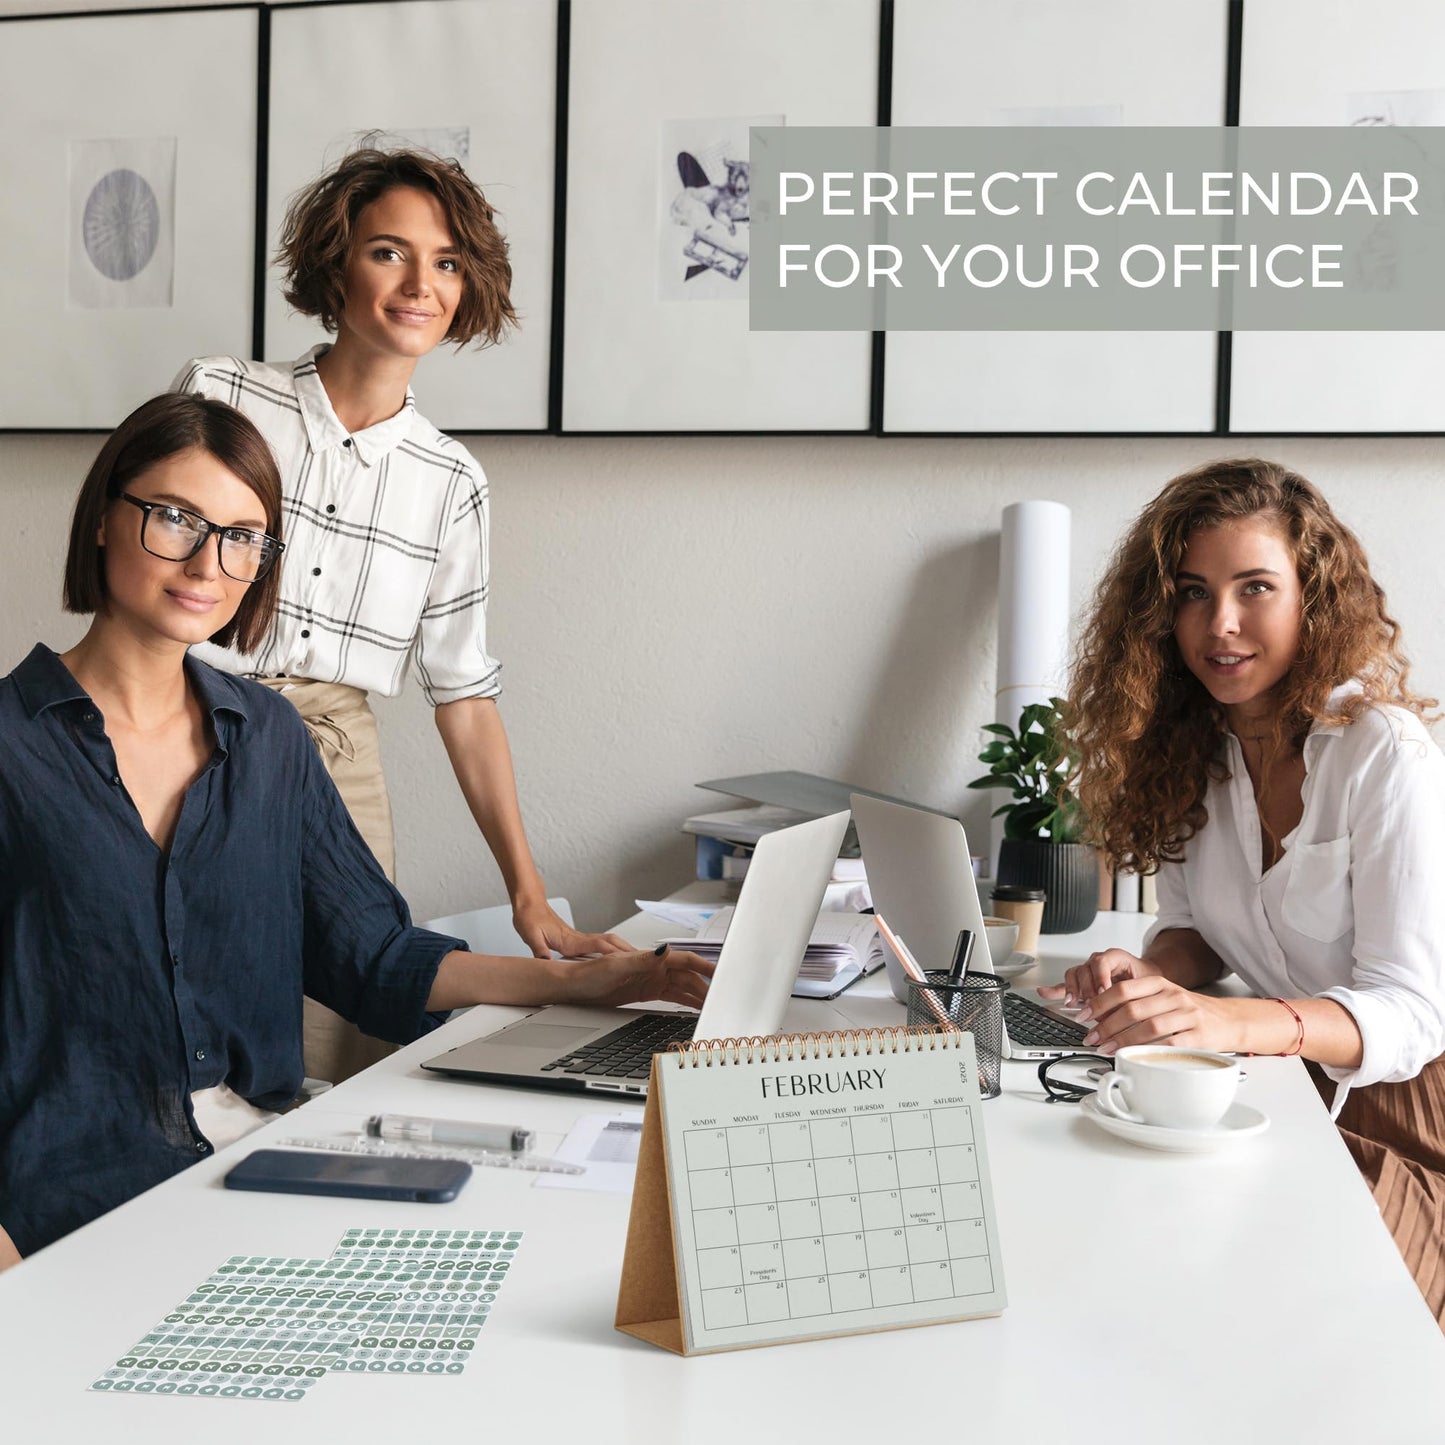 Aesthetic Desk Calendar 2024-2025 with Stickers - Runs from August 2024 until June 2026 - Beautiful Small Flip Desktop Calendar for Easy Organizing